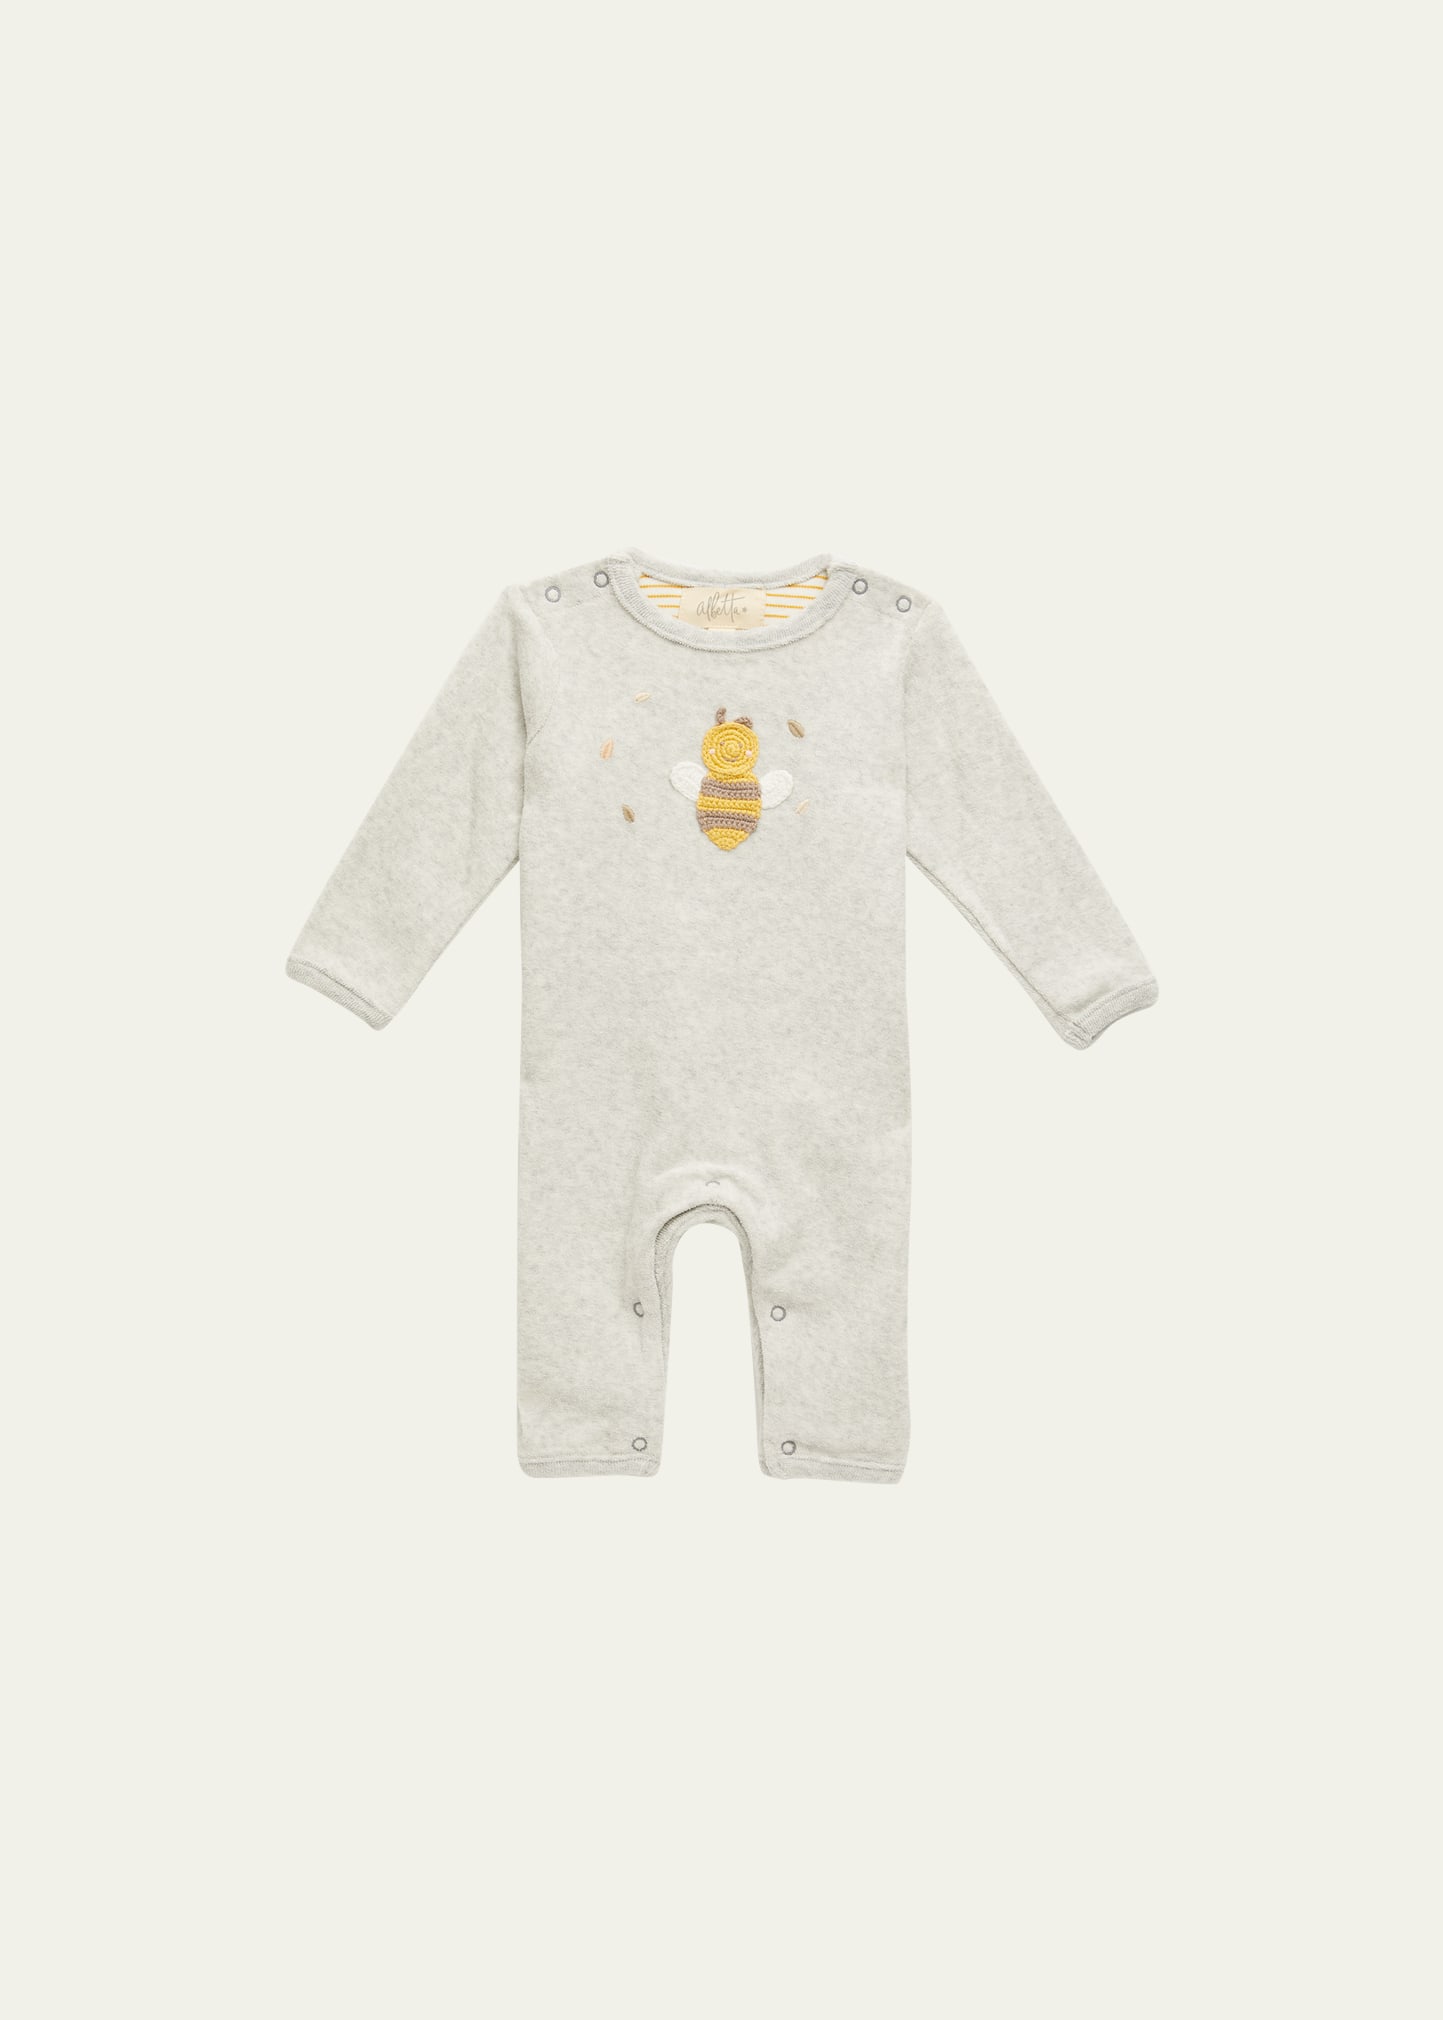 Albetta Kid's Crotched Bee Applique Playsuit In Light Grey